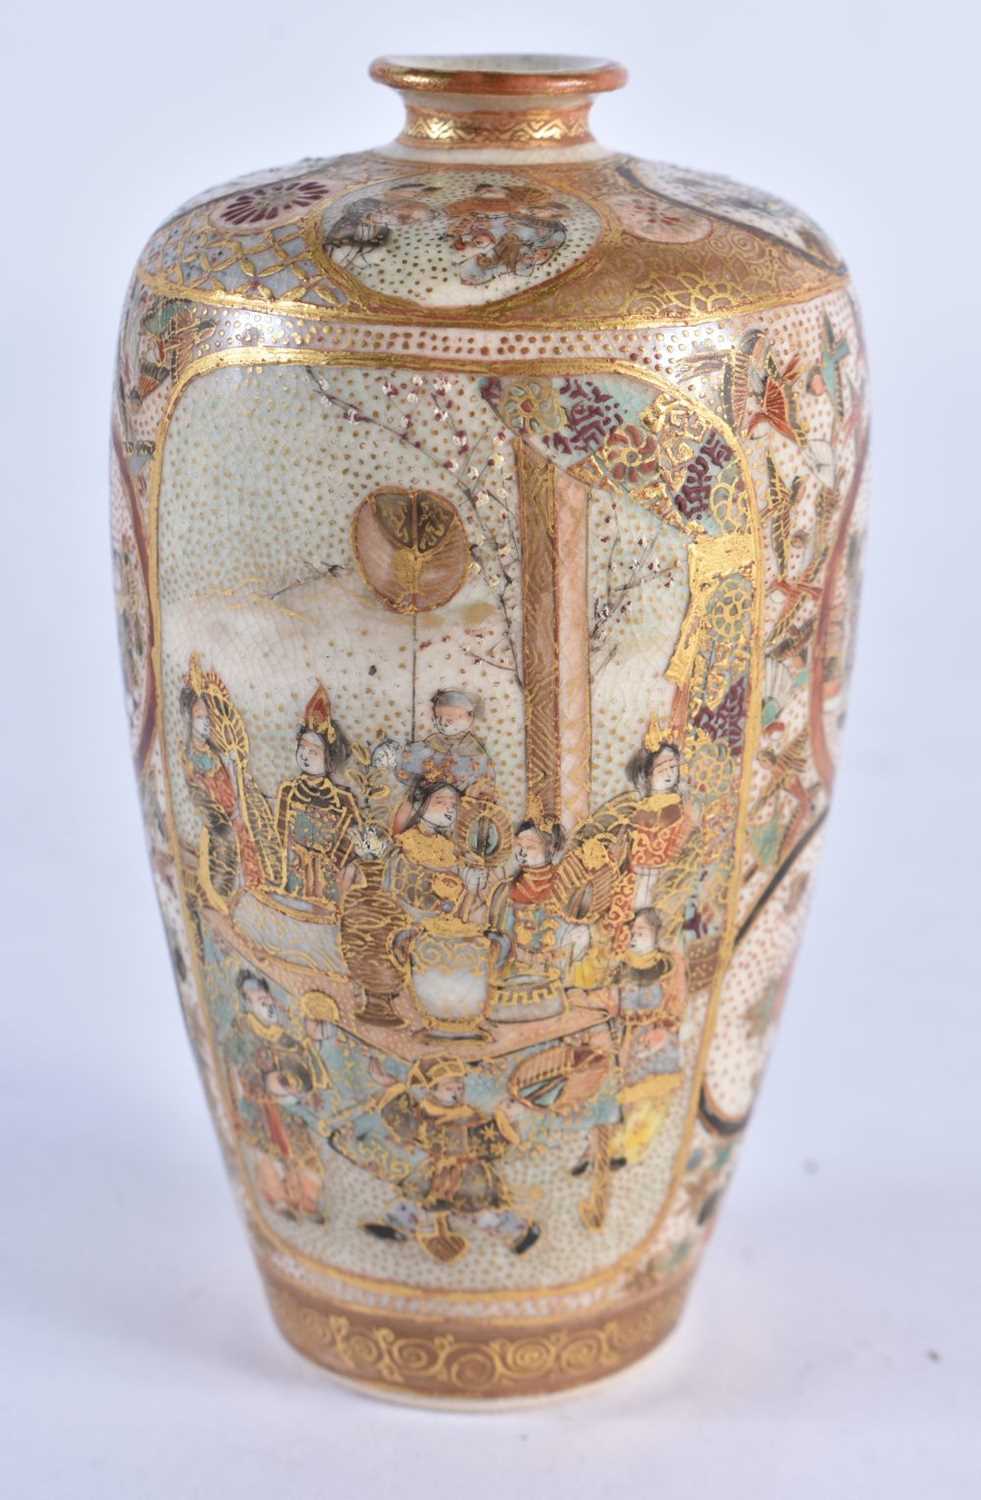 A SMALL 19TH CENTURY JAPANESE MEIJI PERIOD SATSUMA POTTERY VASE painted with figures and birds - Image 3 of 14